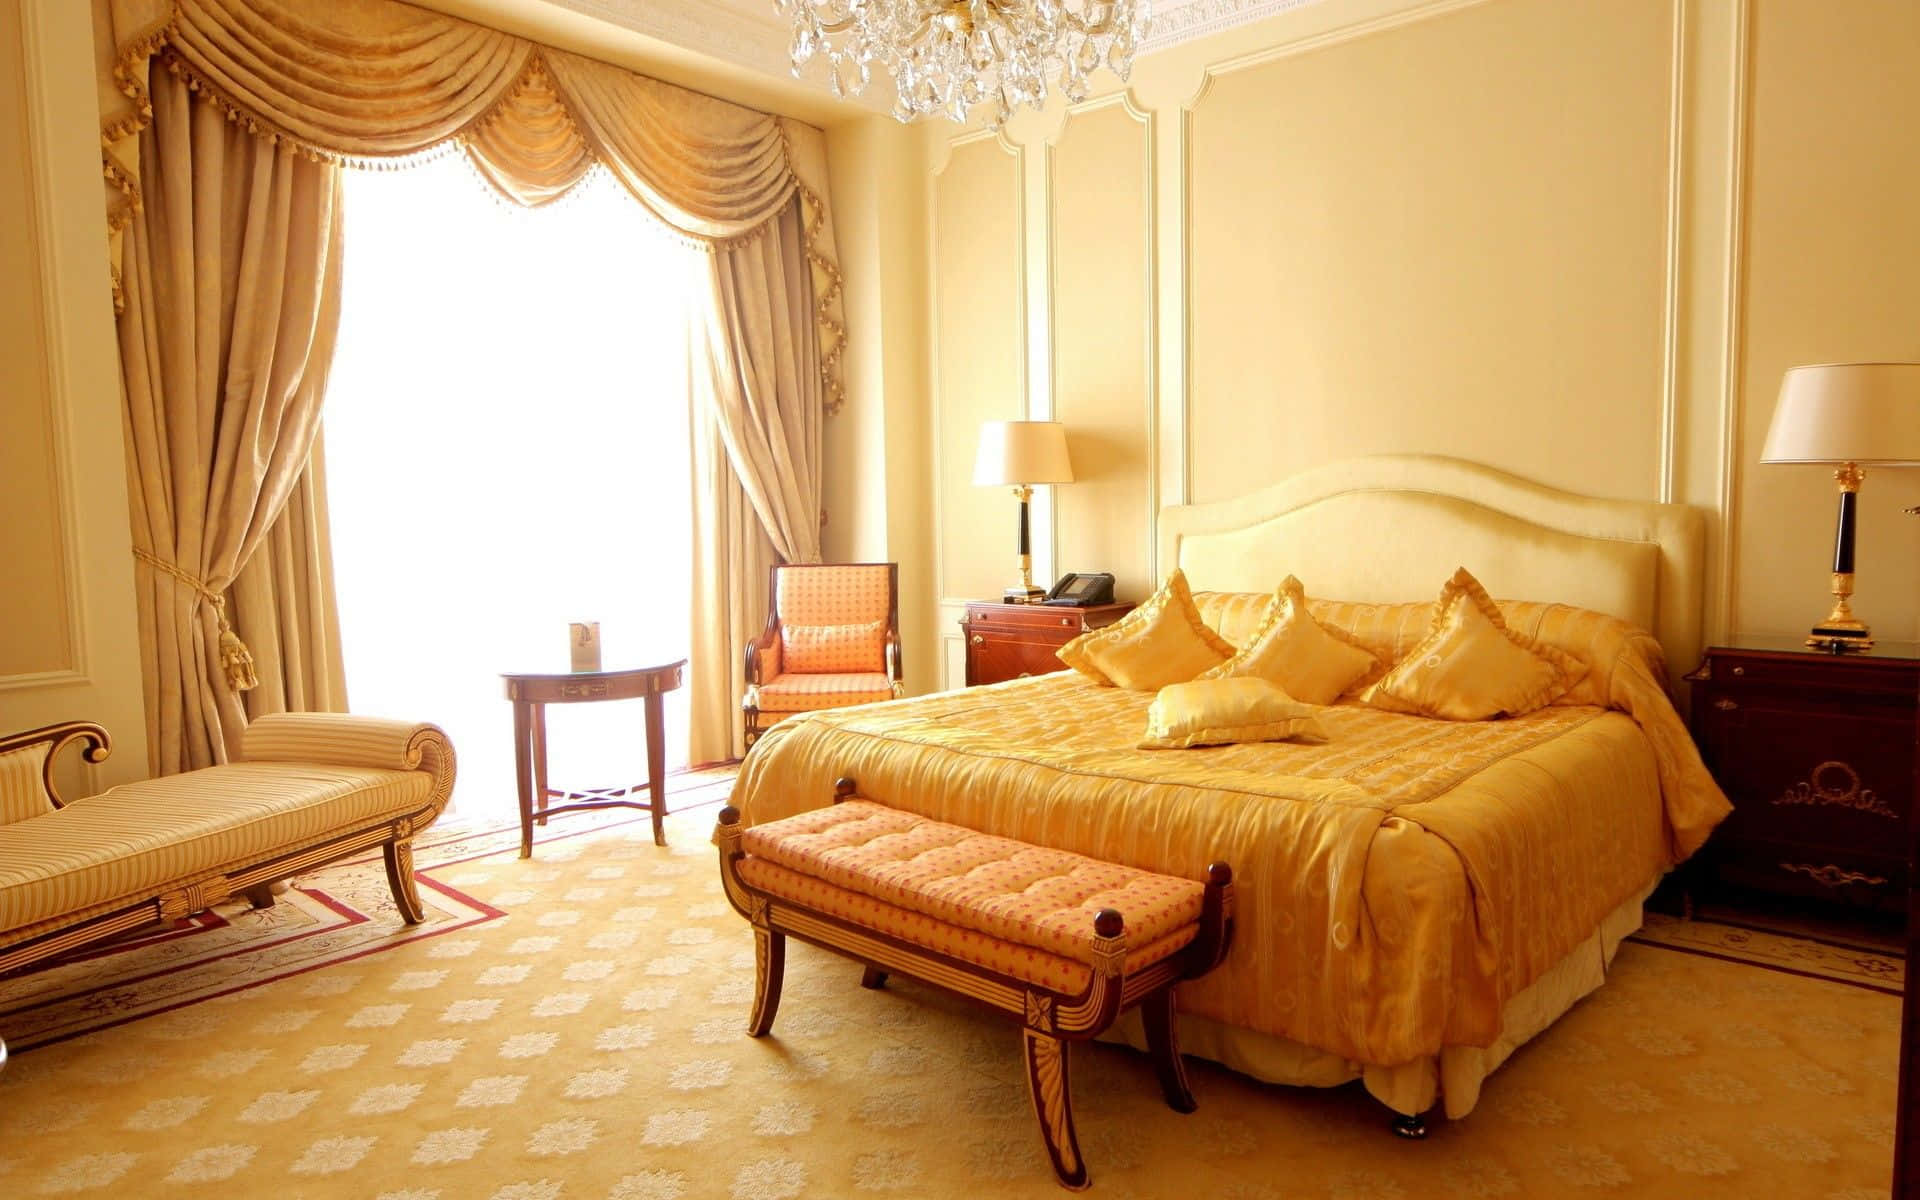 Spacious and Luxurious Hotel Room with Elegant Decor